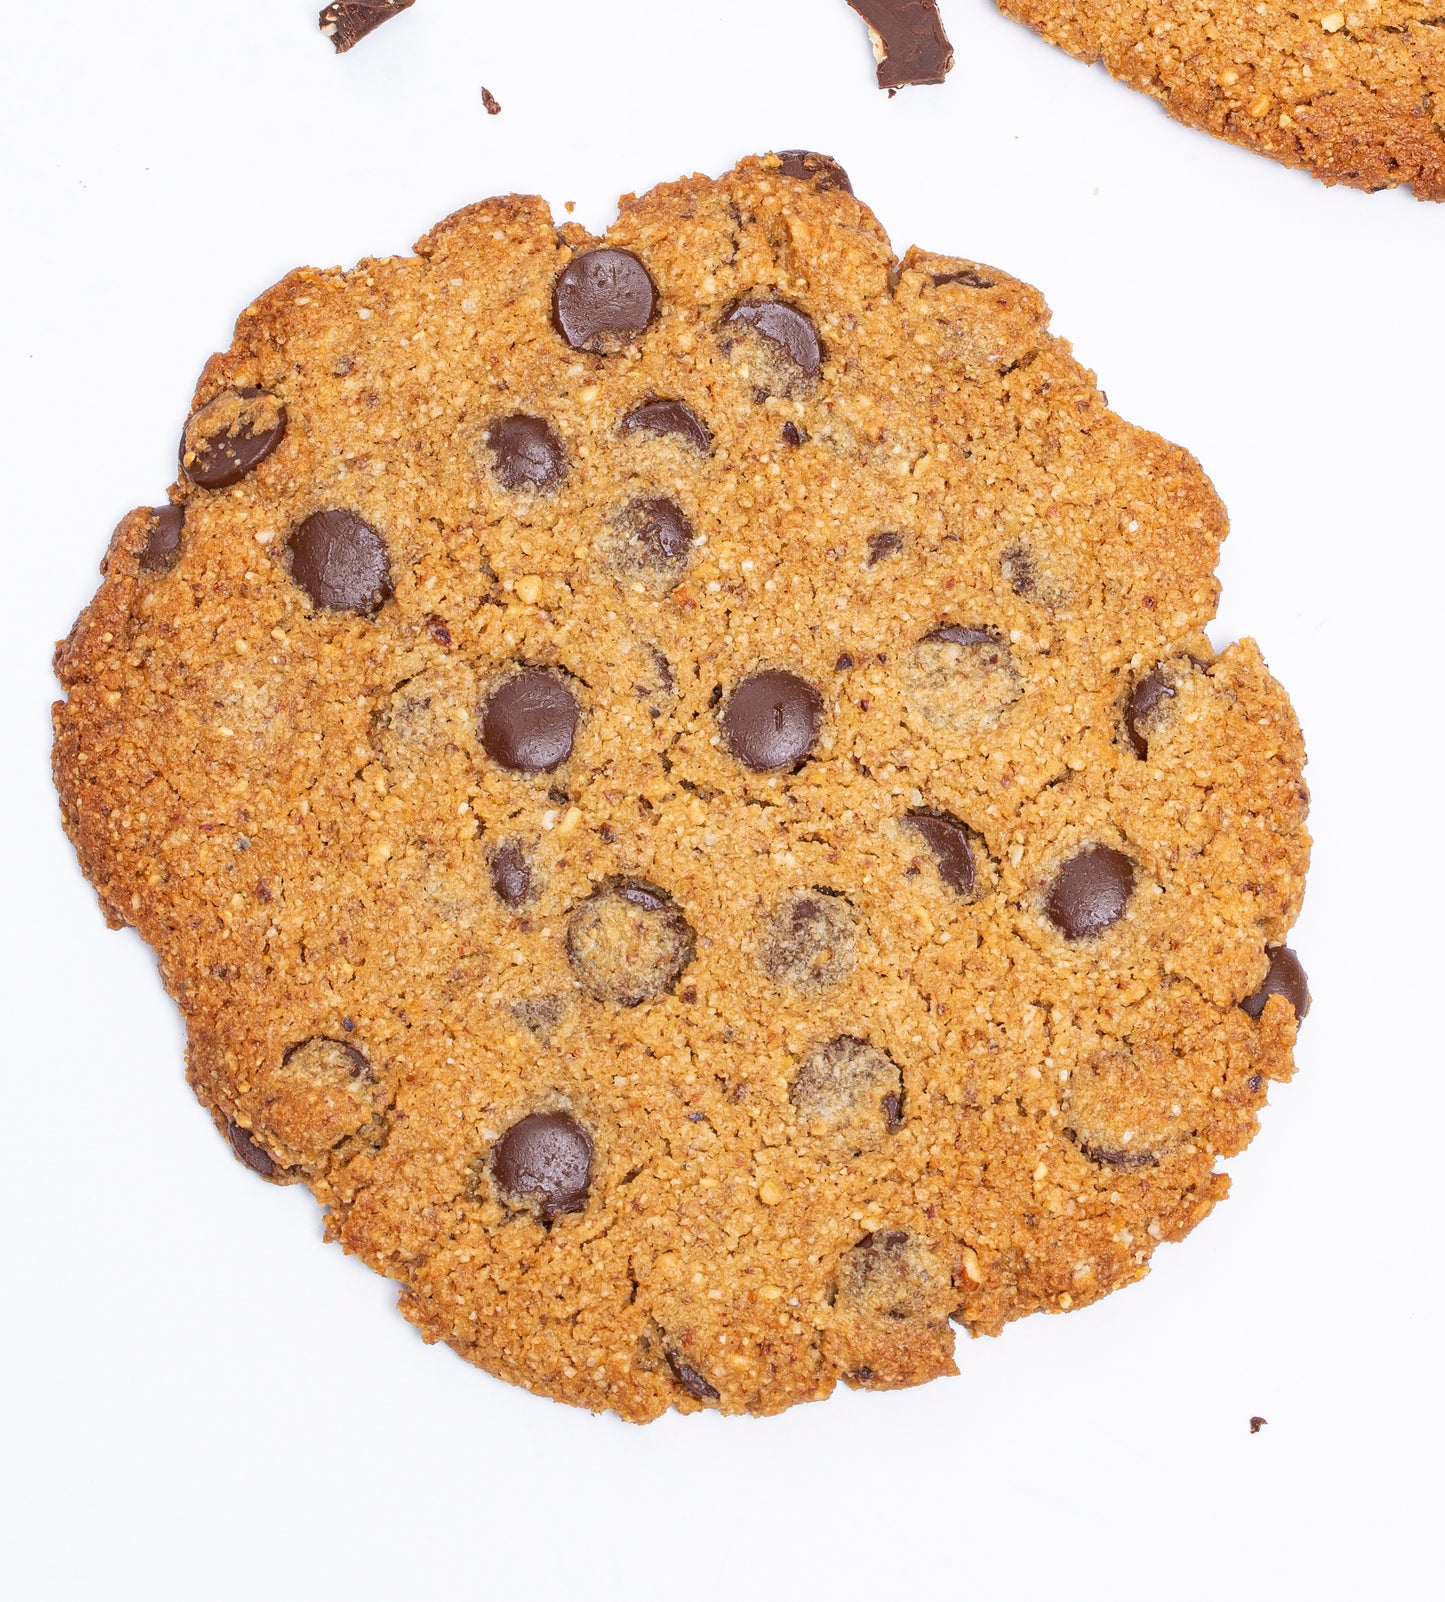 PROTEIN chocolate chip Cookies | Gluten-free, Paleo, Sweetened with Coconut Sugar, Egg-Free, Vegan Optional